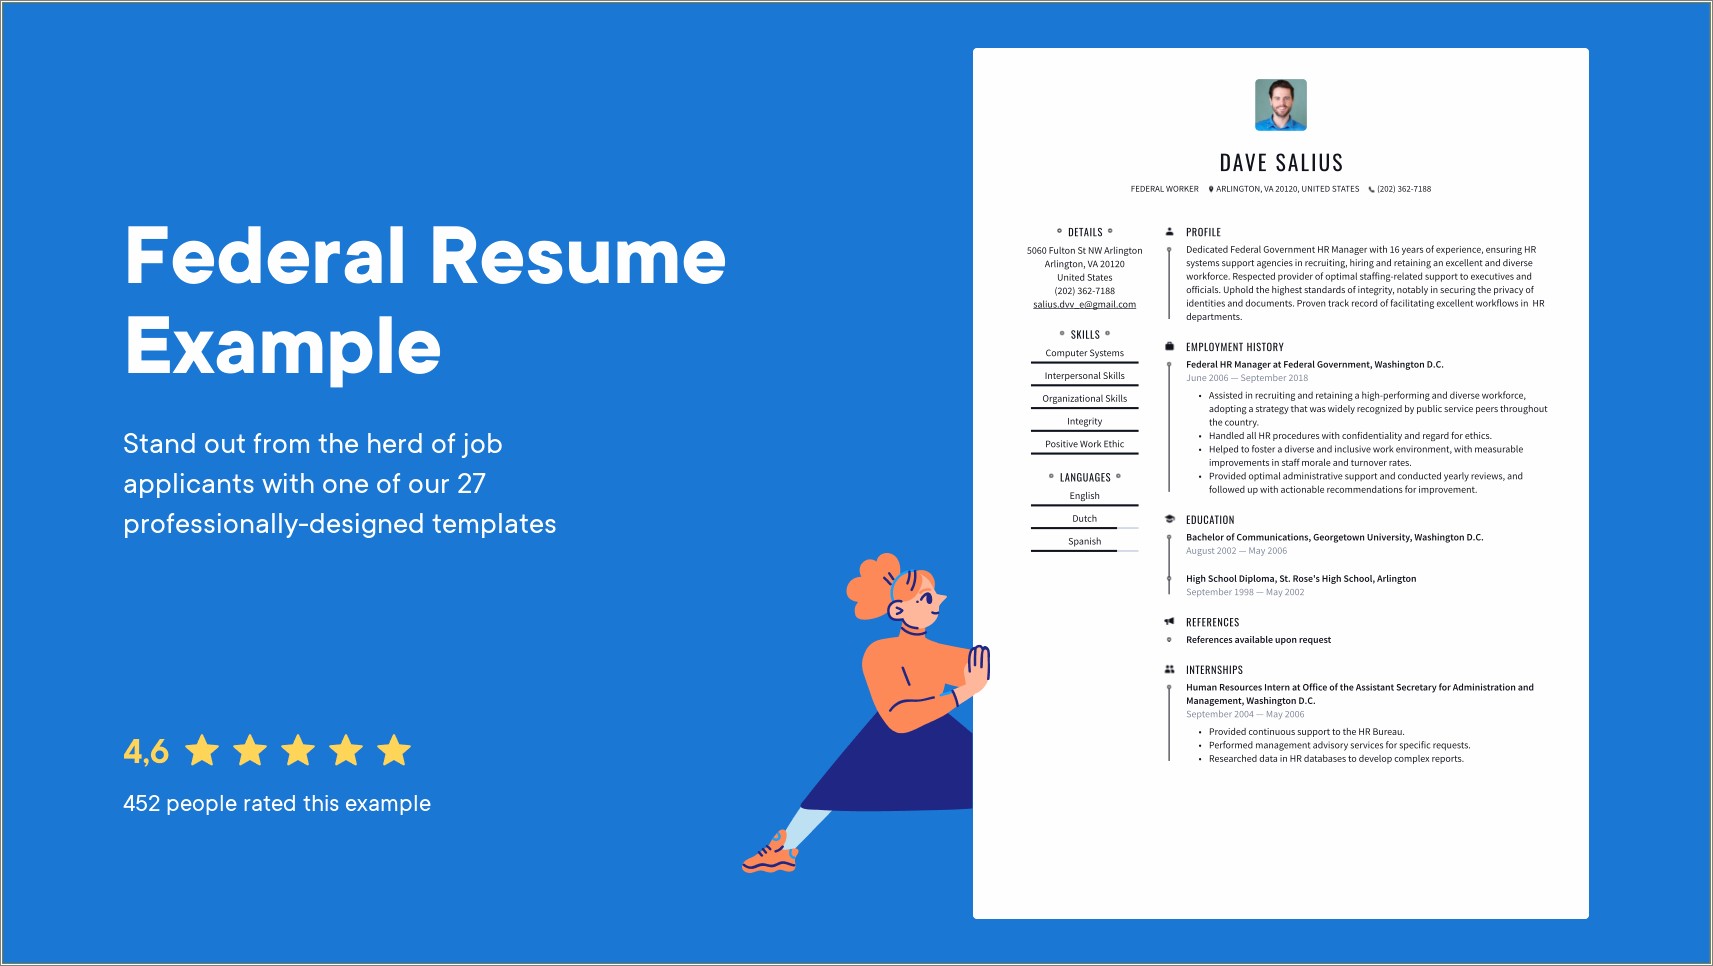 Level Of Experience Resume Federal Resume